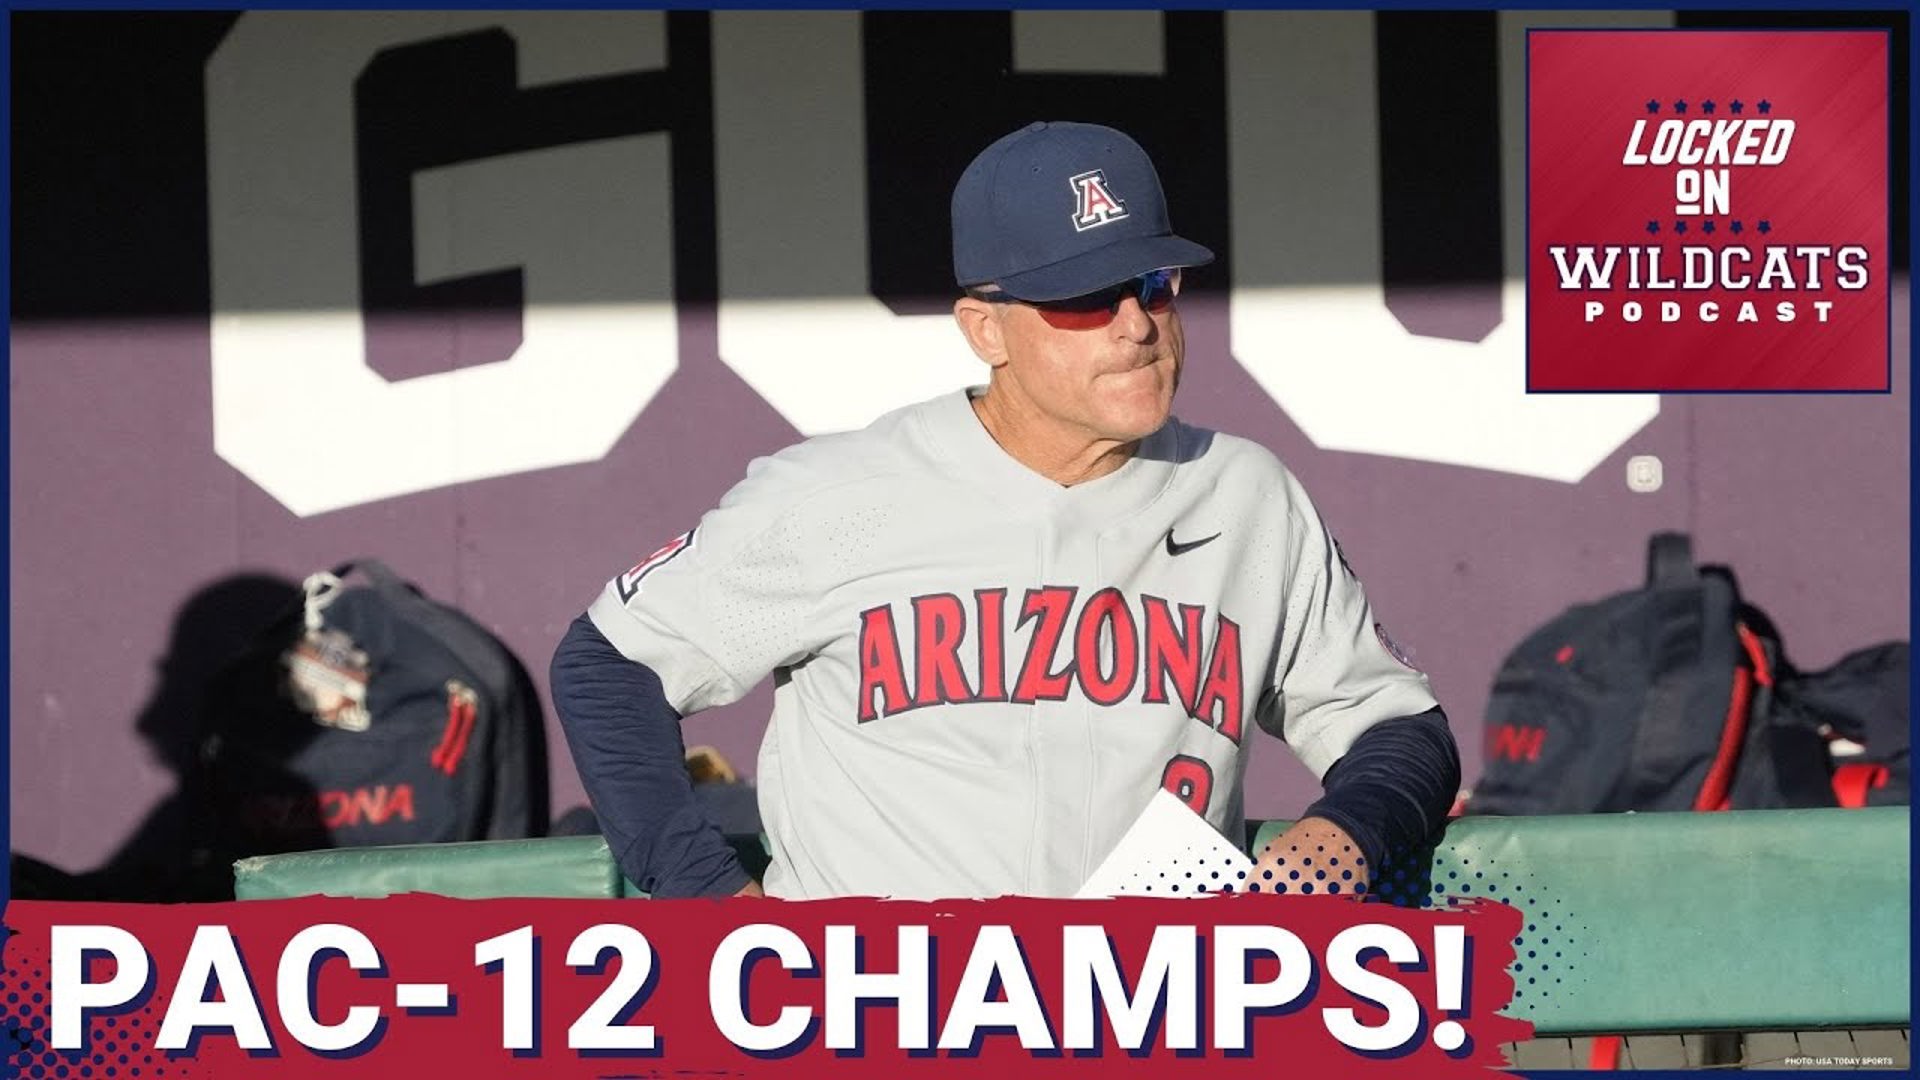 Arizona baseball is Pac-12 champs. Chip Hale has proven the doubters wrong. What are the teams' chances of making a super regional?